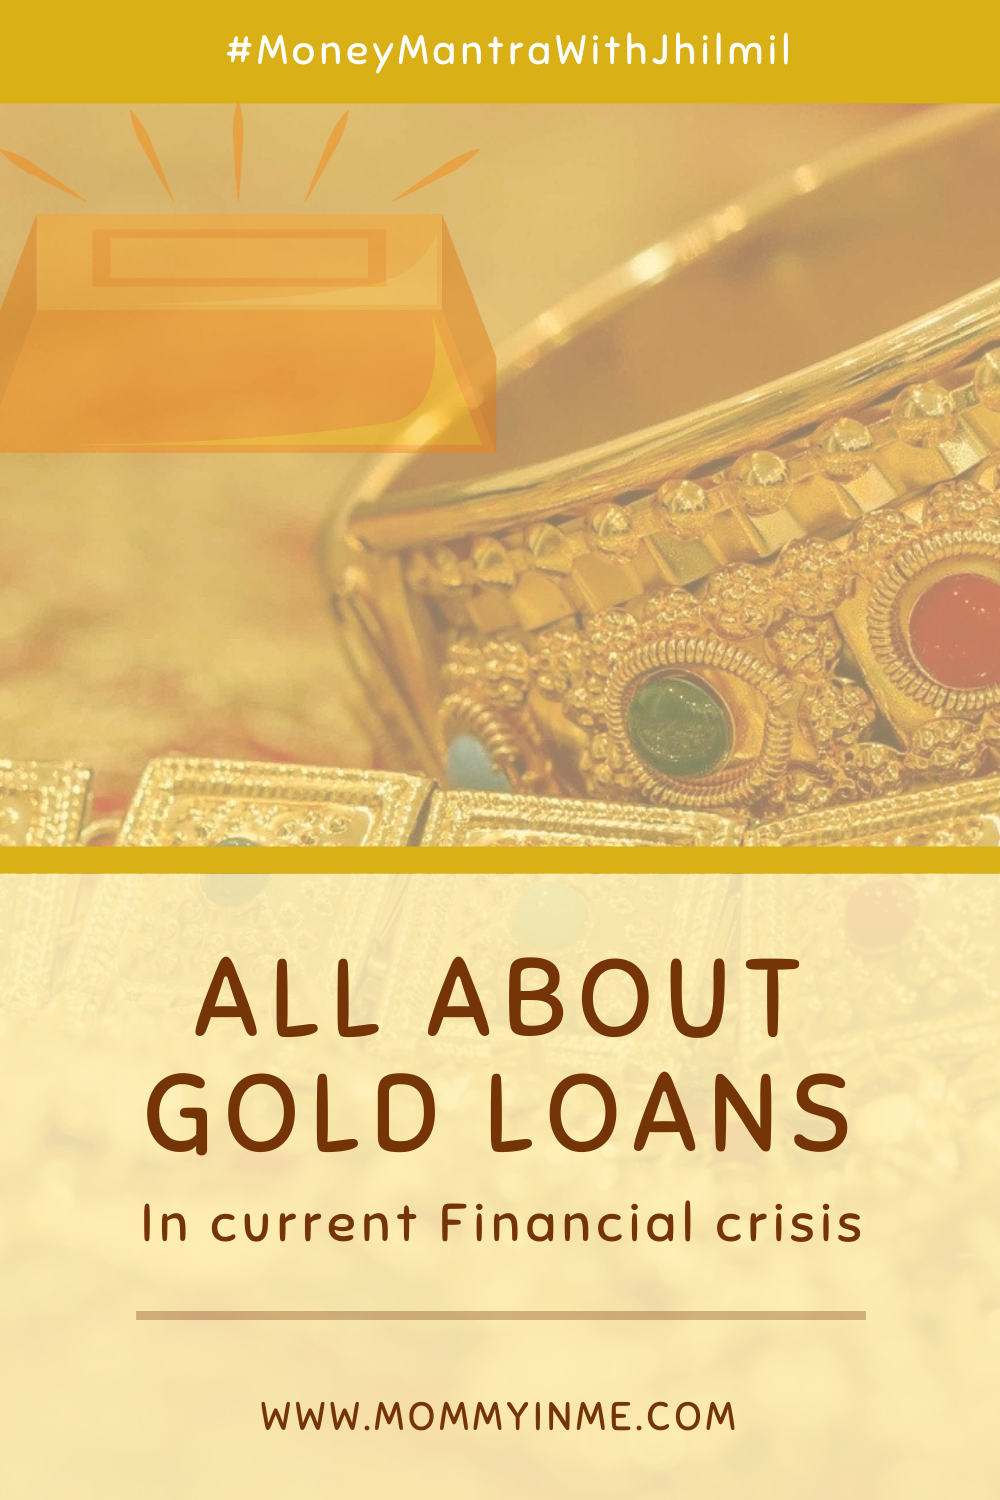 All you want to know about Gold loans during current financial crisis? What are the pros of Gold Loans? #goldloan #gold #goldbars #goldcoins #loan #personalloan #moneymantrawithJhilmil #financialliteracy #financialawareness #moneymanagement 